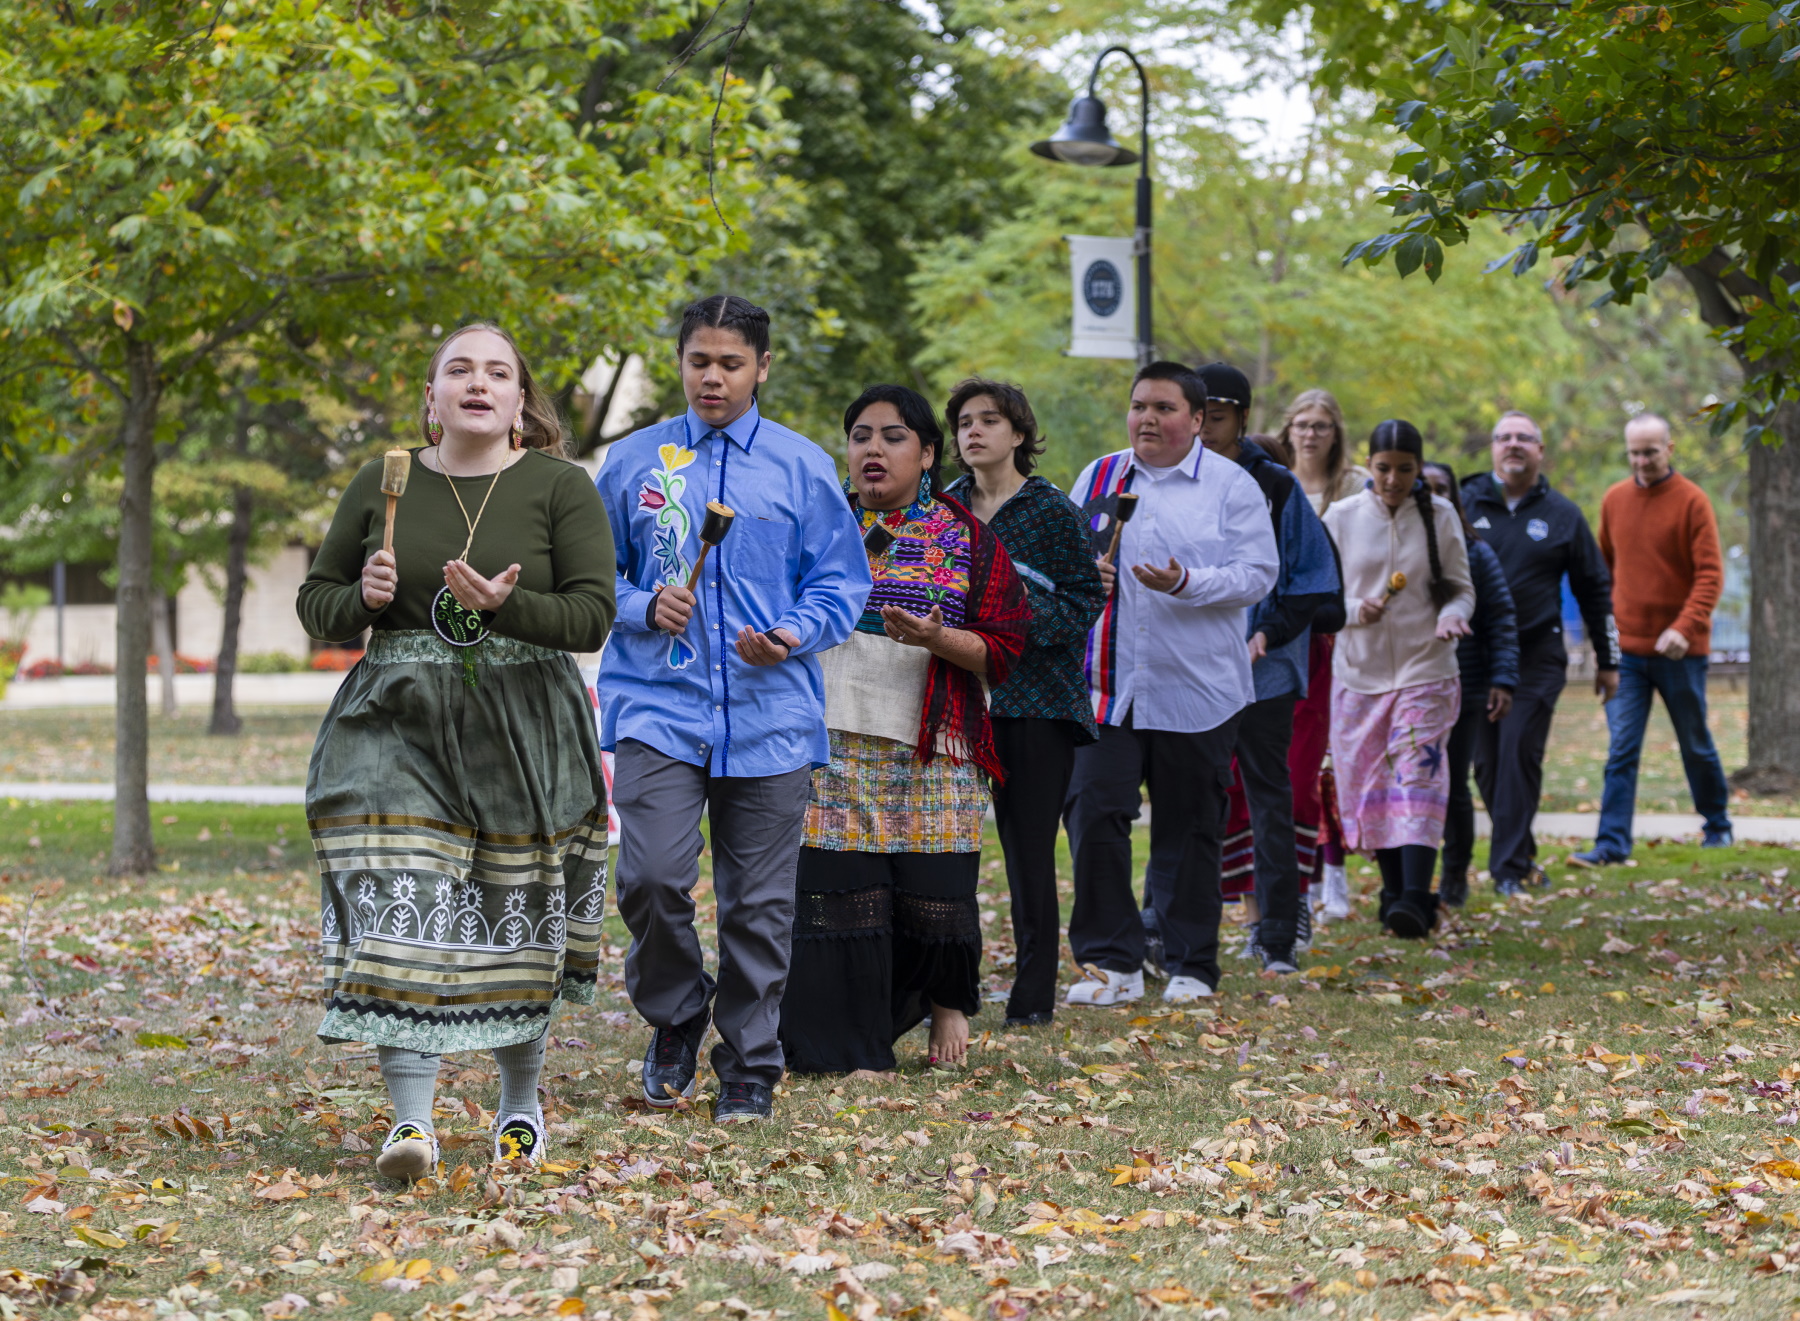 Participants walk through Main Hall Green as part of the Indigenous Peoples' Day Celebration.